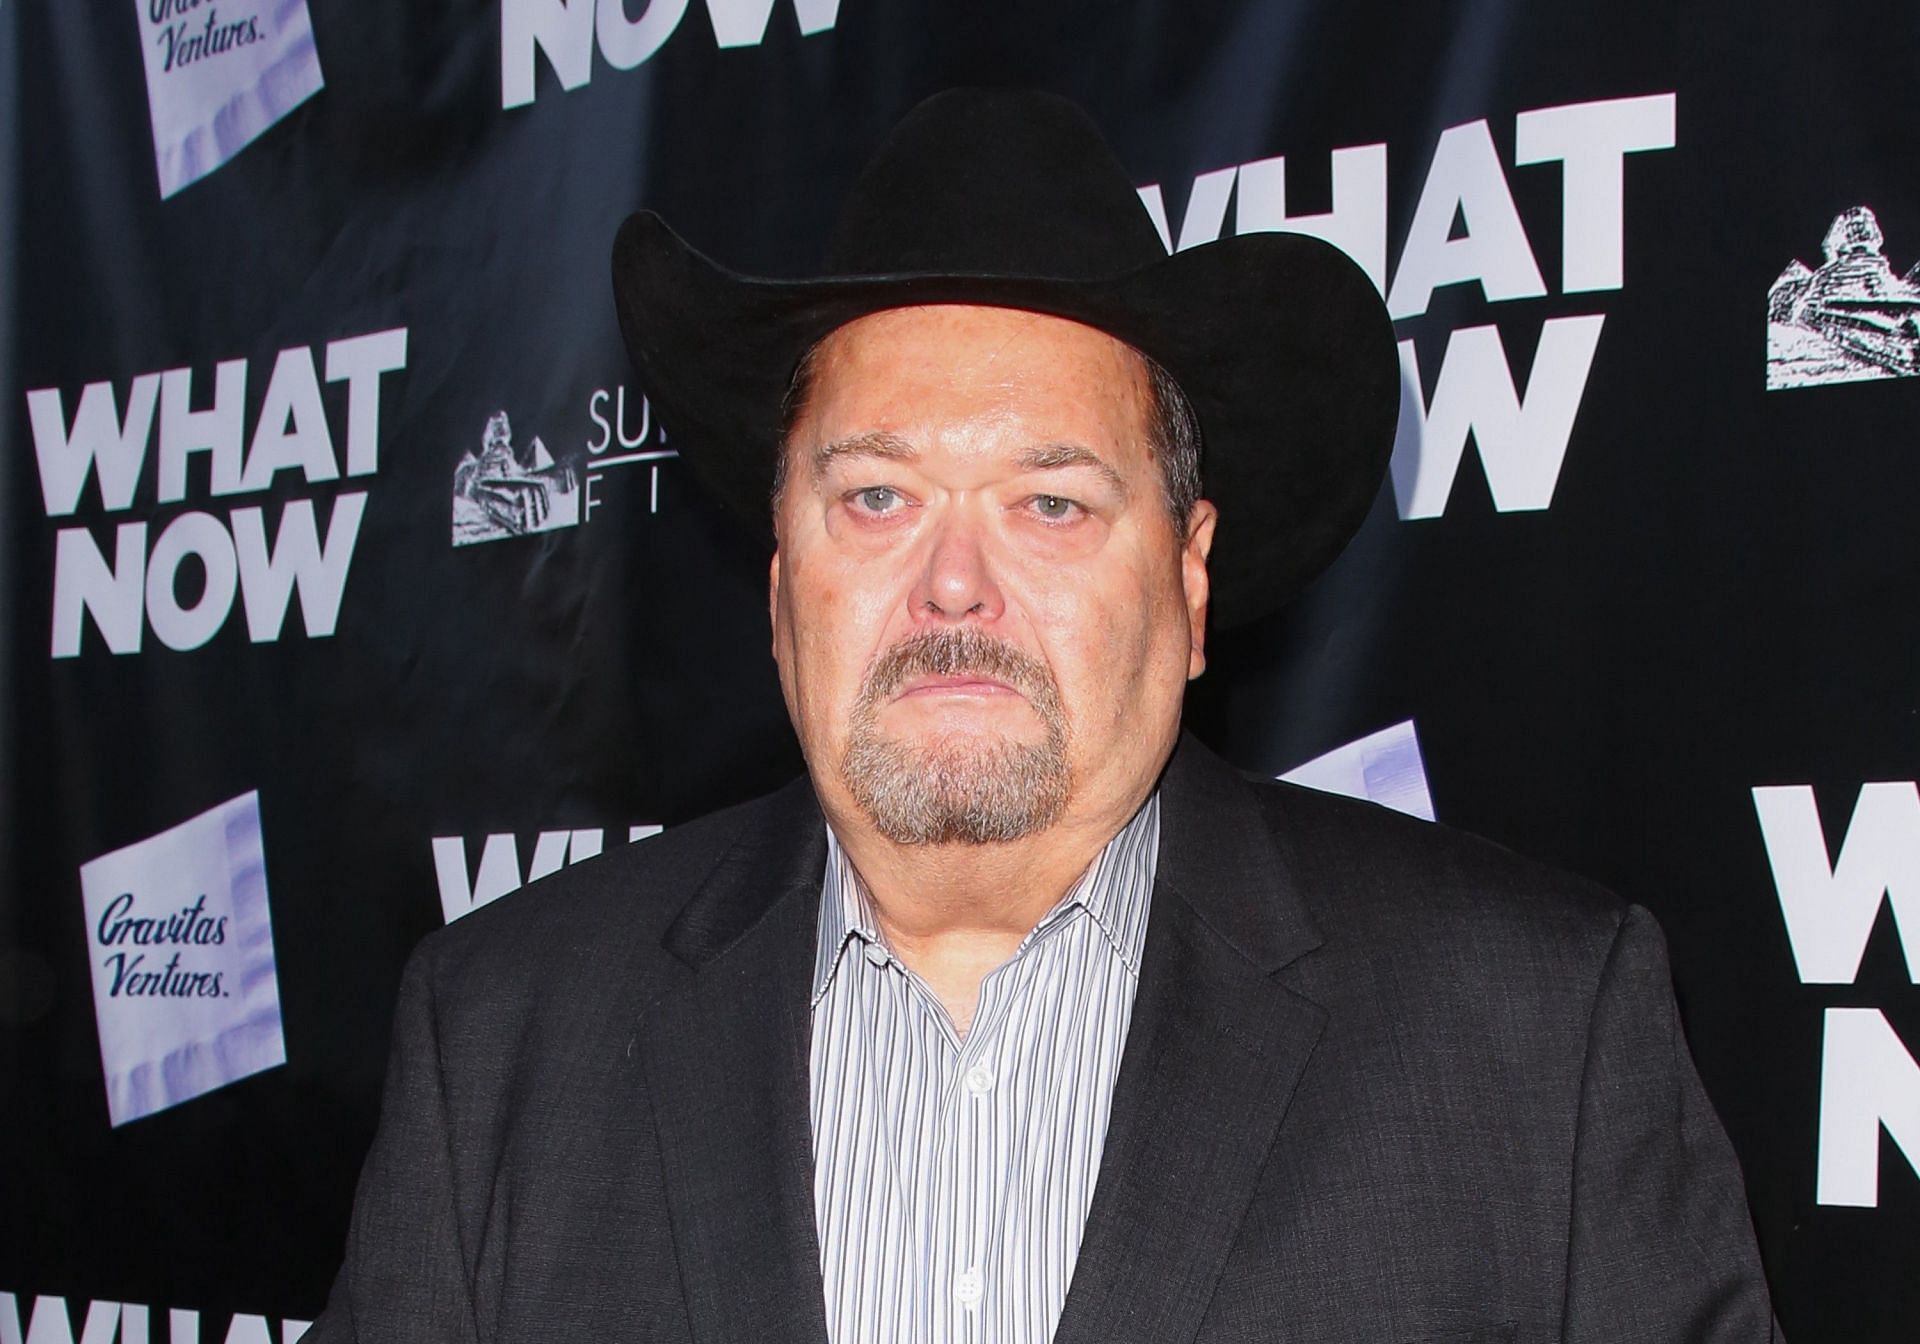 Jim Ross took to Twitter to update fans on his health again today.